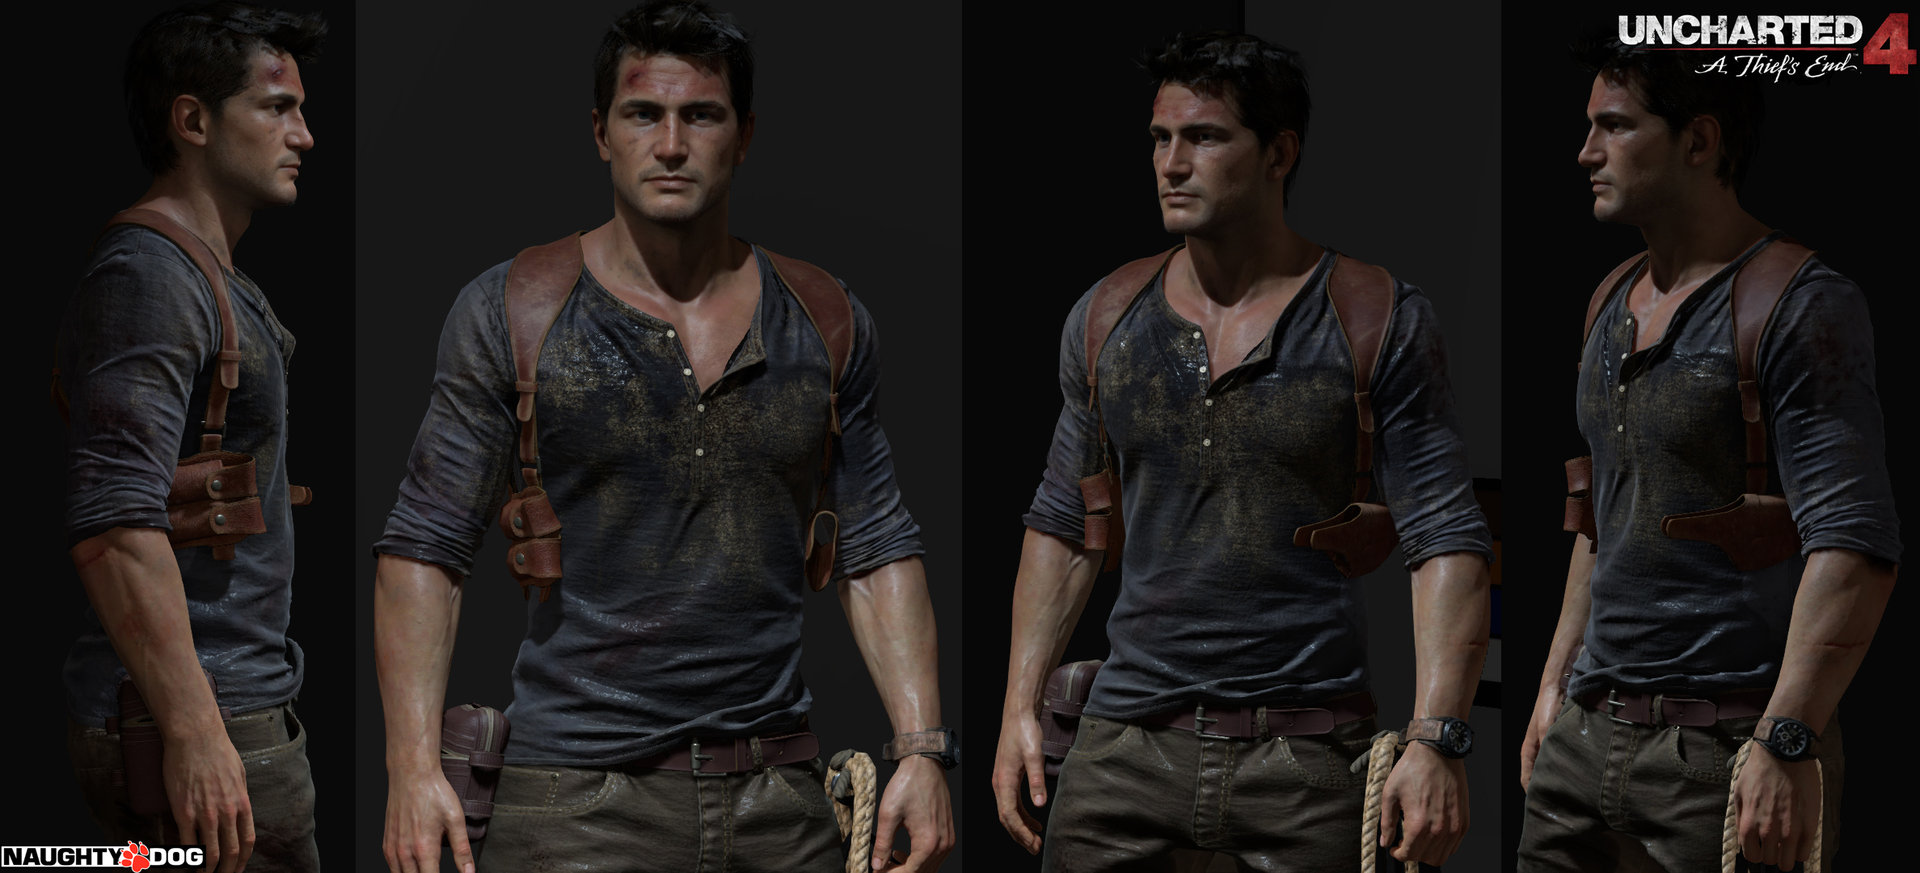 Uncharted 4's Nathan Drake looks very next-gen in this close-up